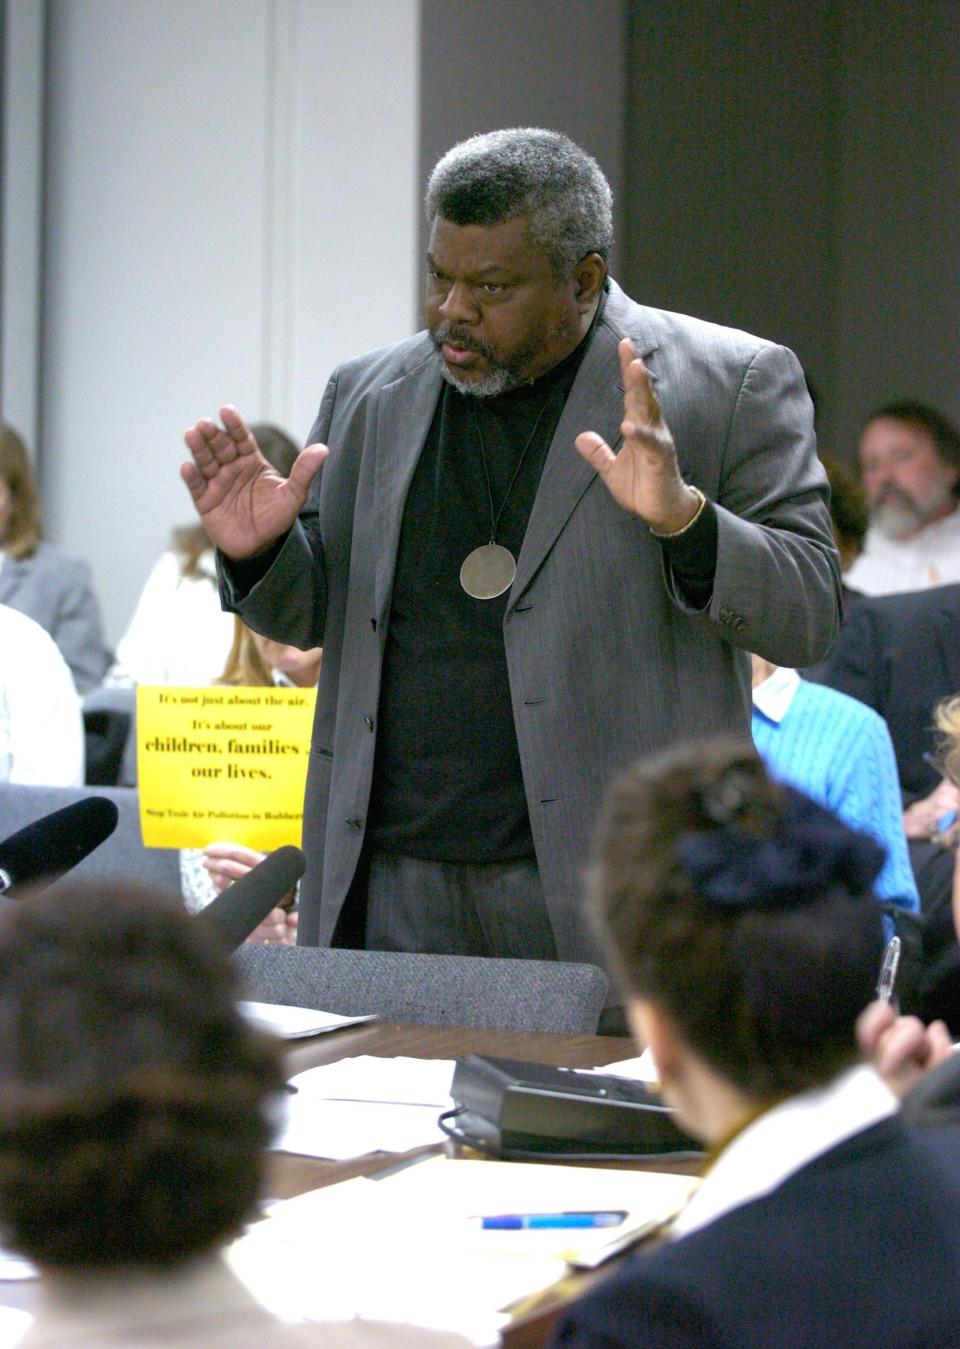 -

-Text: Photo by David Harpe, SPECIAL TO THE COURIER-JOURNAL March 17th, 2004 The Reverend Louis Coleman of the Justice Resource Center speaks before the Air Pollution Control Board.